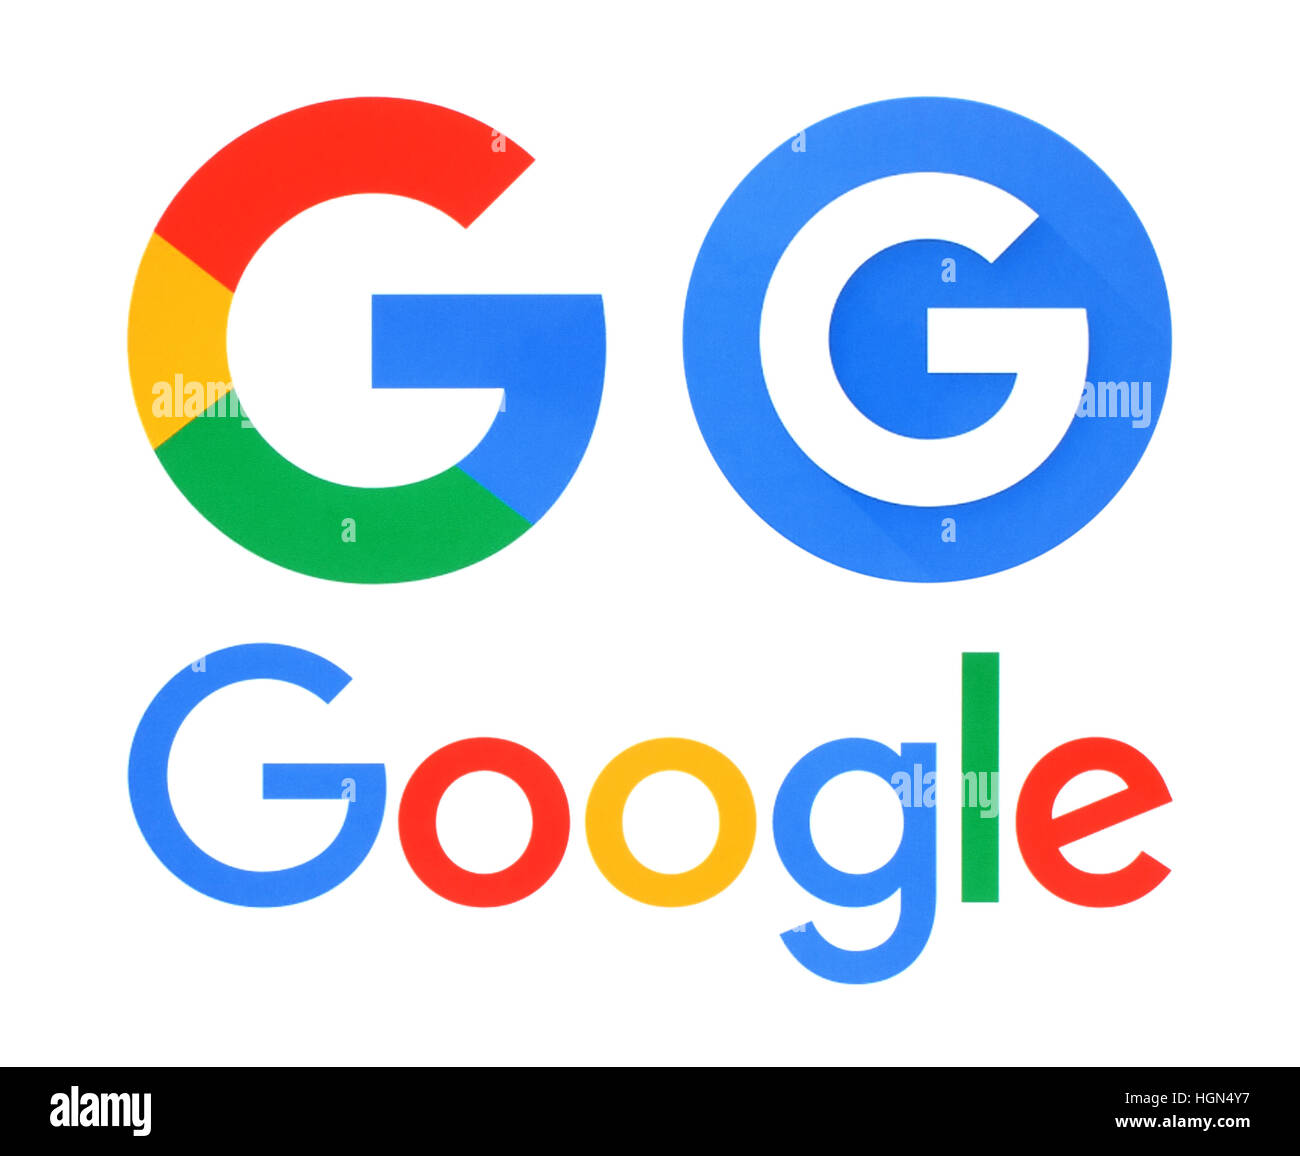 Kiev, Ukraine - May 30, 2016: Collection of Google logos printed on white paper. Google is USA multinational corporation. Stock Photo